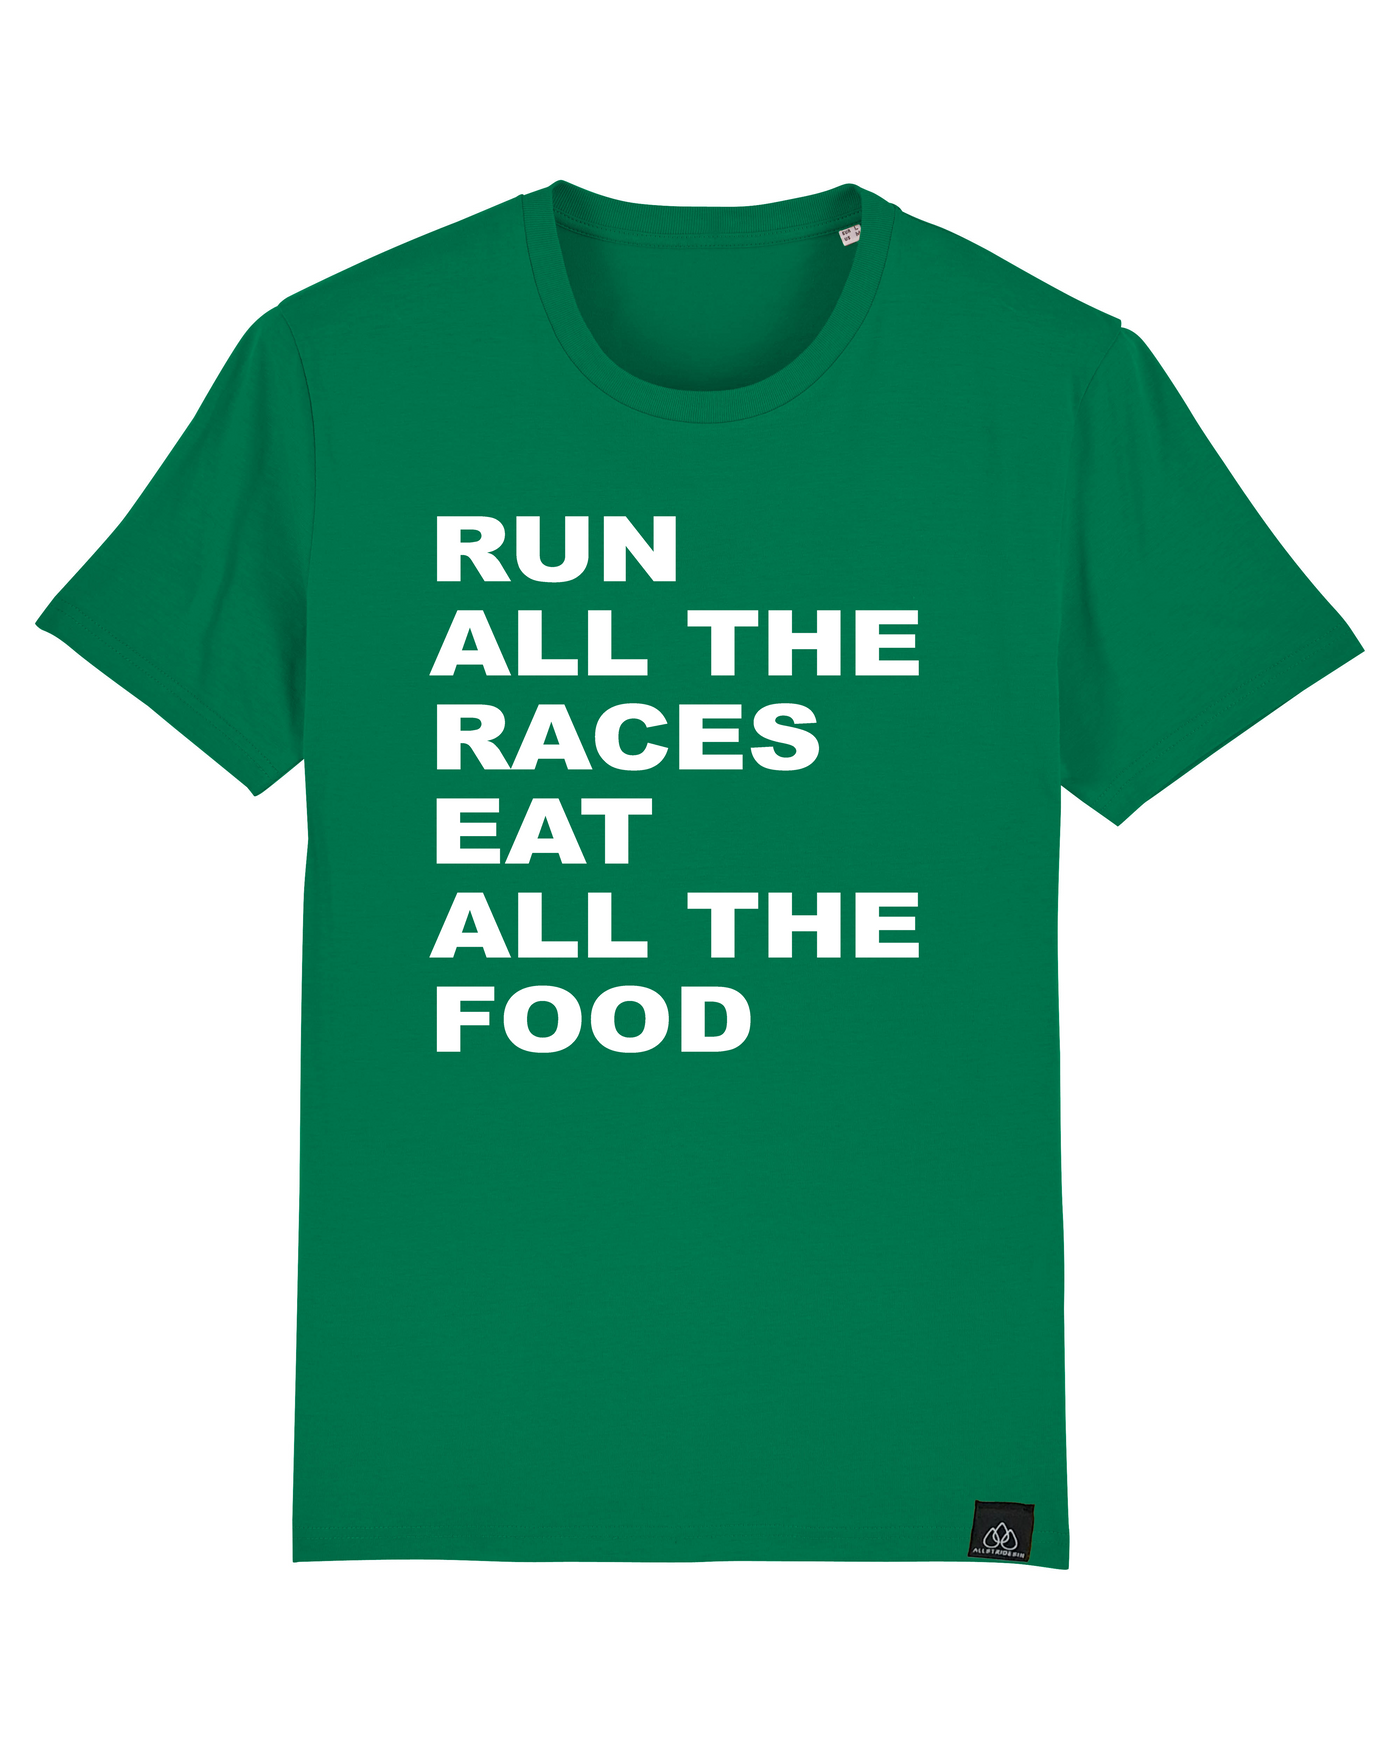 RUN ALL THE RACES EAT ALL THE FOOD - ICONIC UNISEX T-SHIRT | ALLSTRIDESIN®